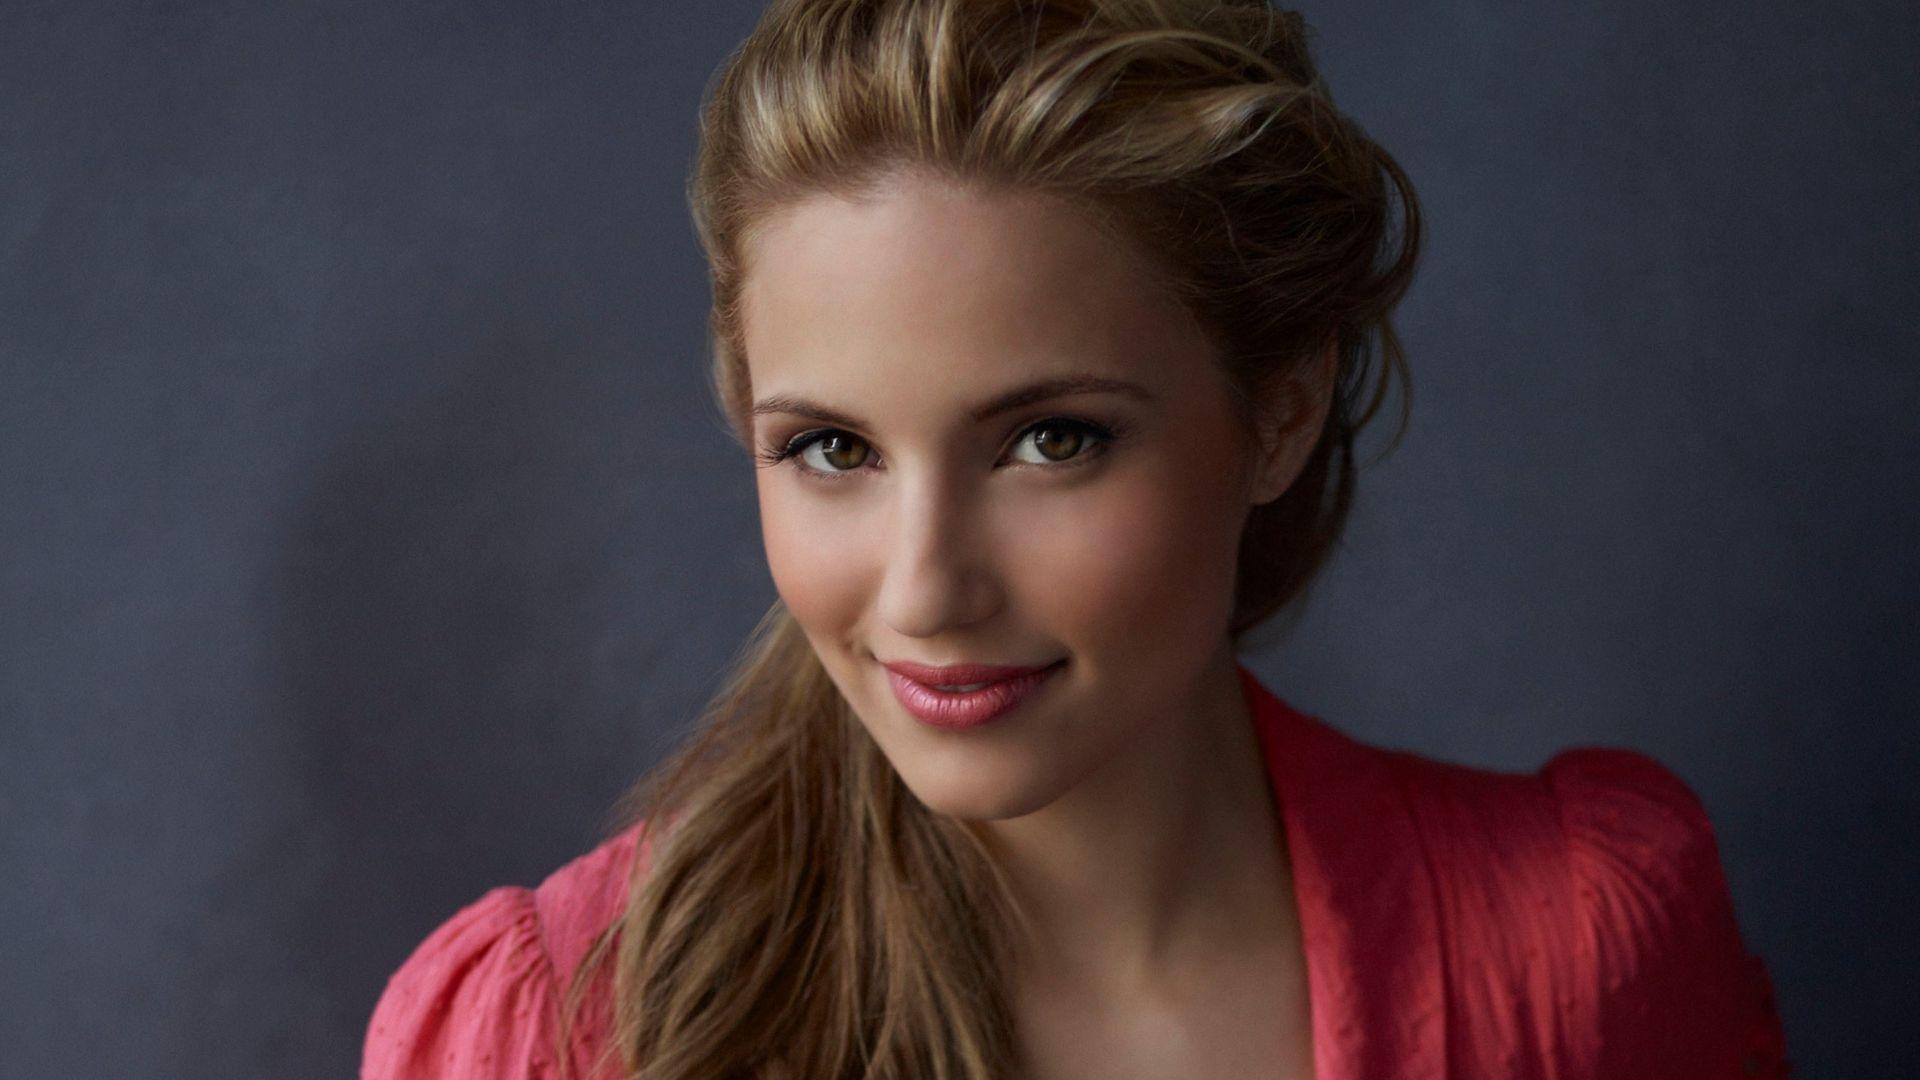 Dianna Agron Wallpaper Dianna Agron Modern Full HD Picture